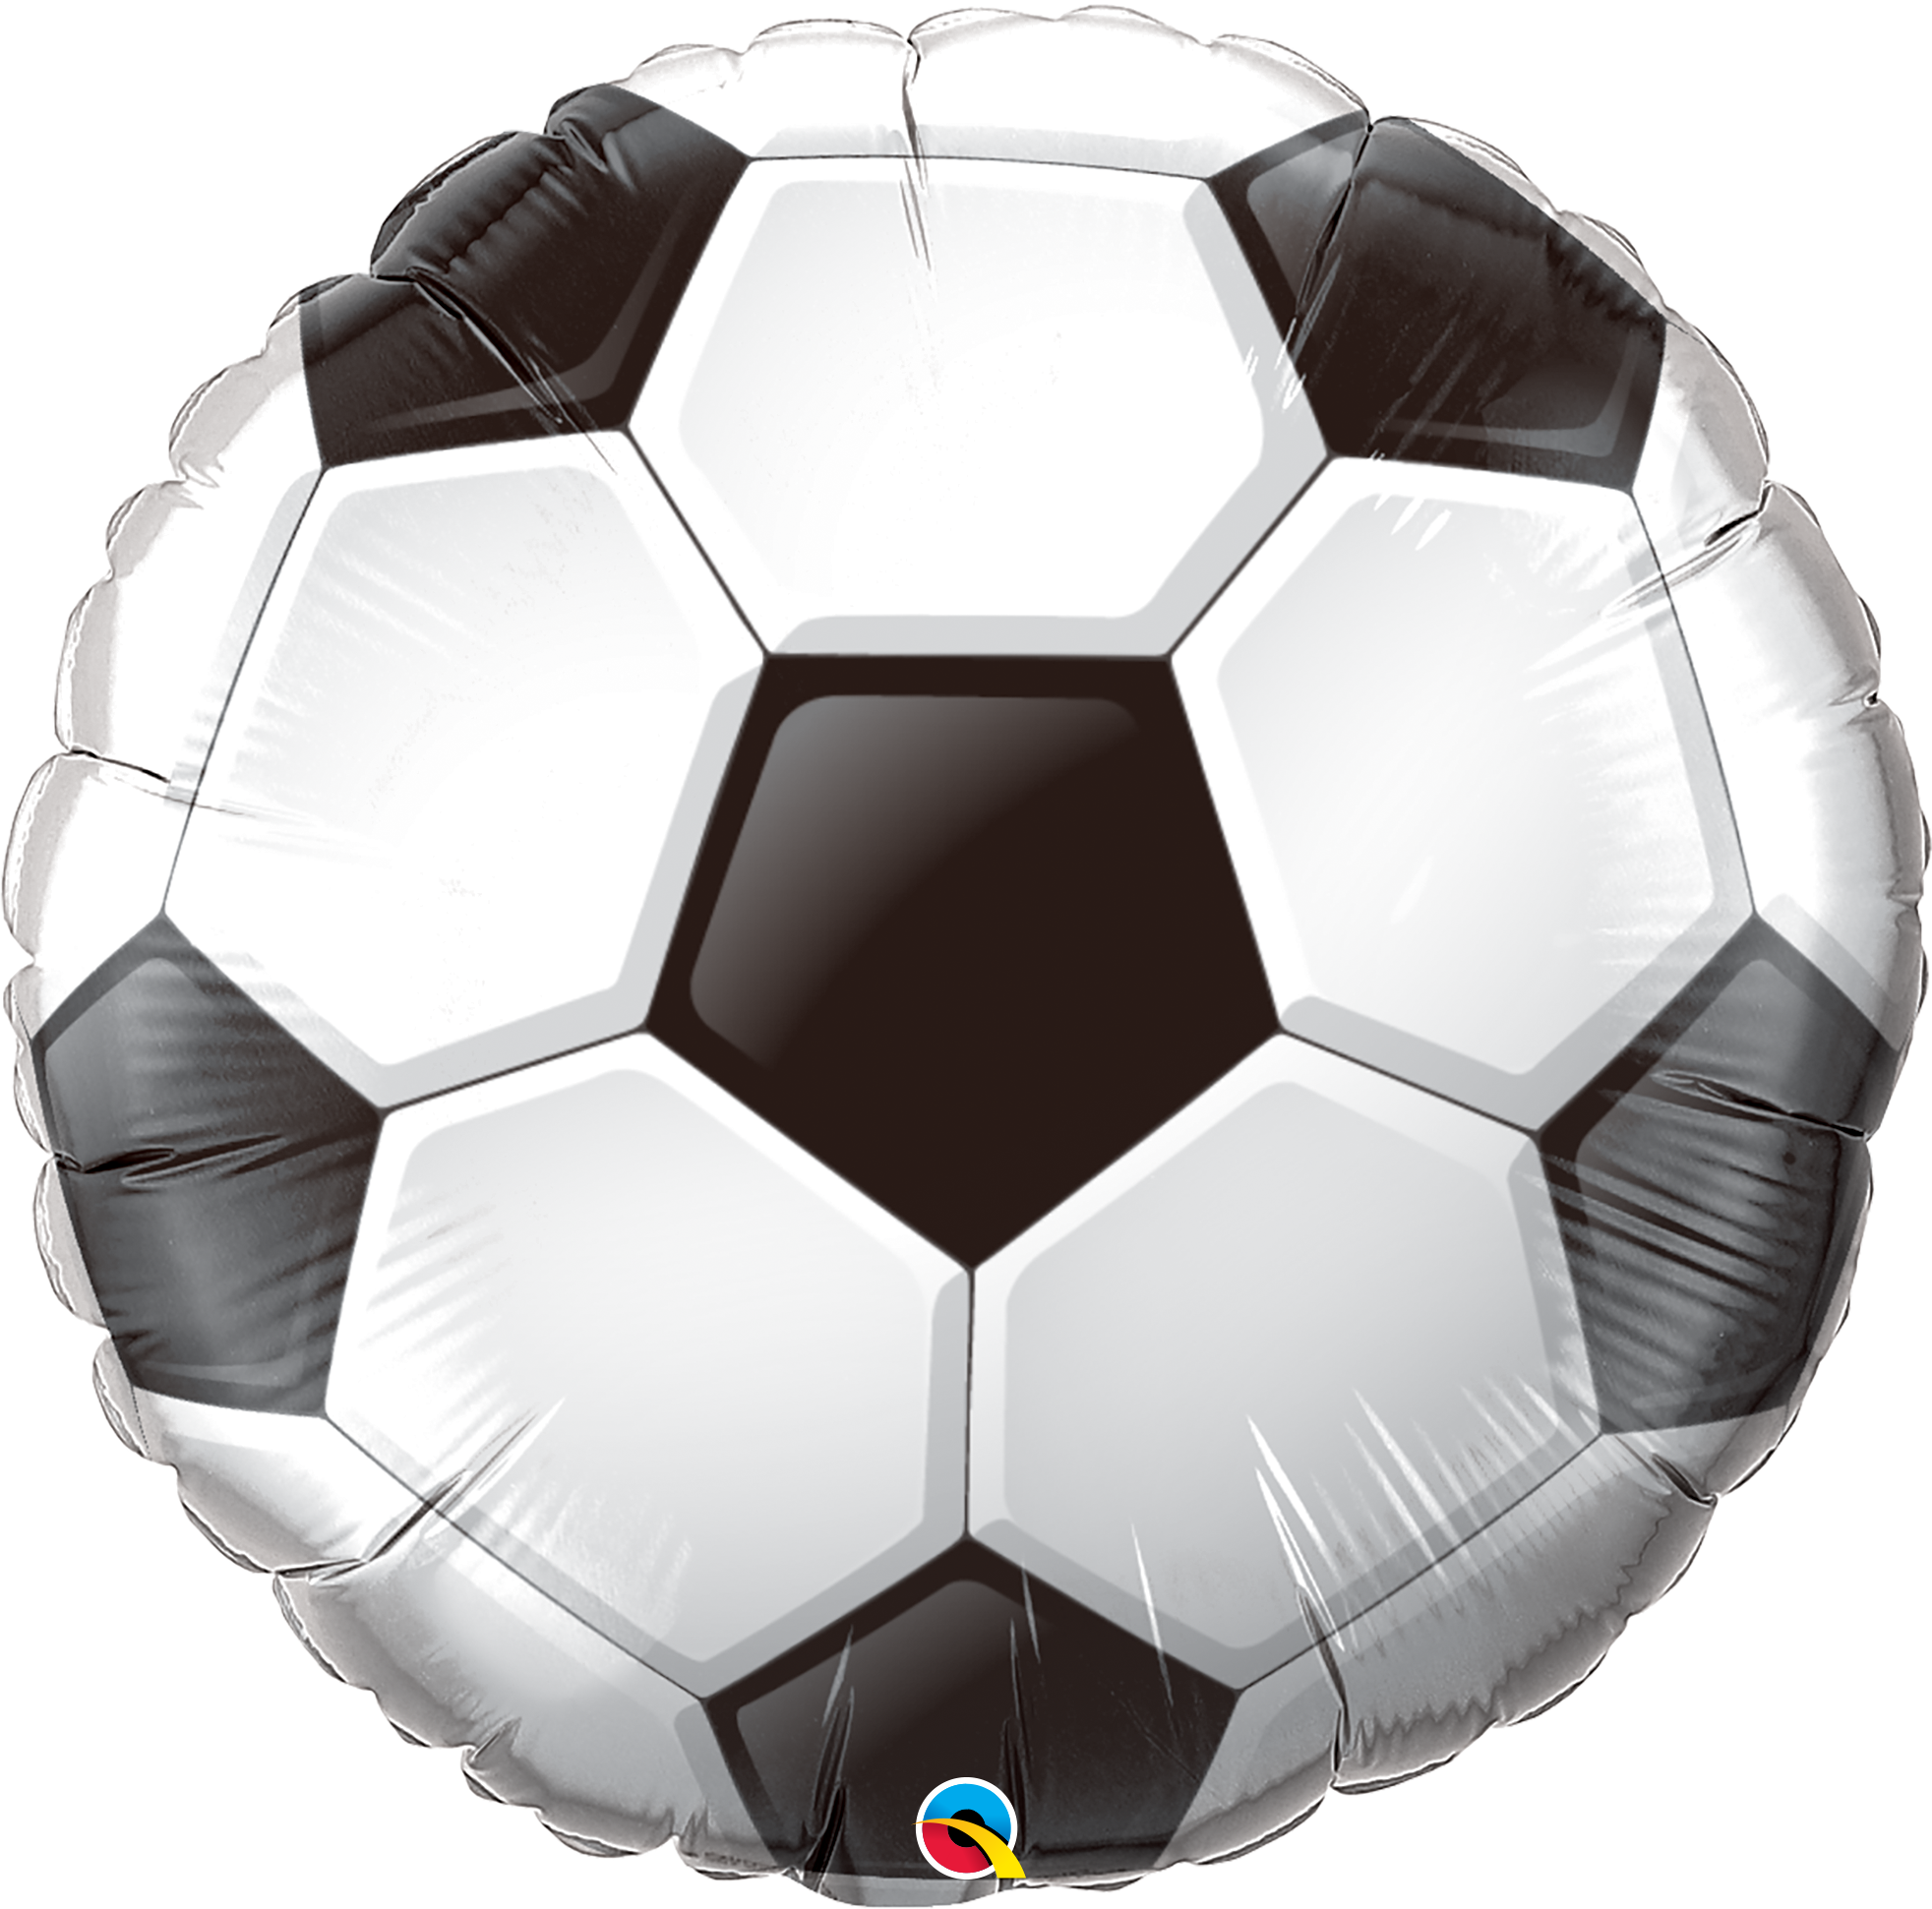 9" Soccer Ball Foil Airfill Balloon | Buy 5 Or More Save 20%